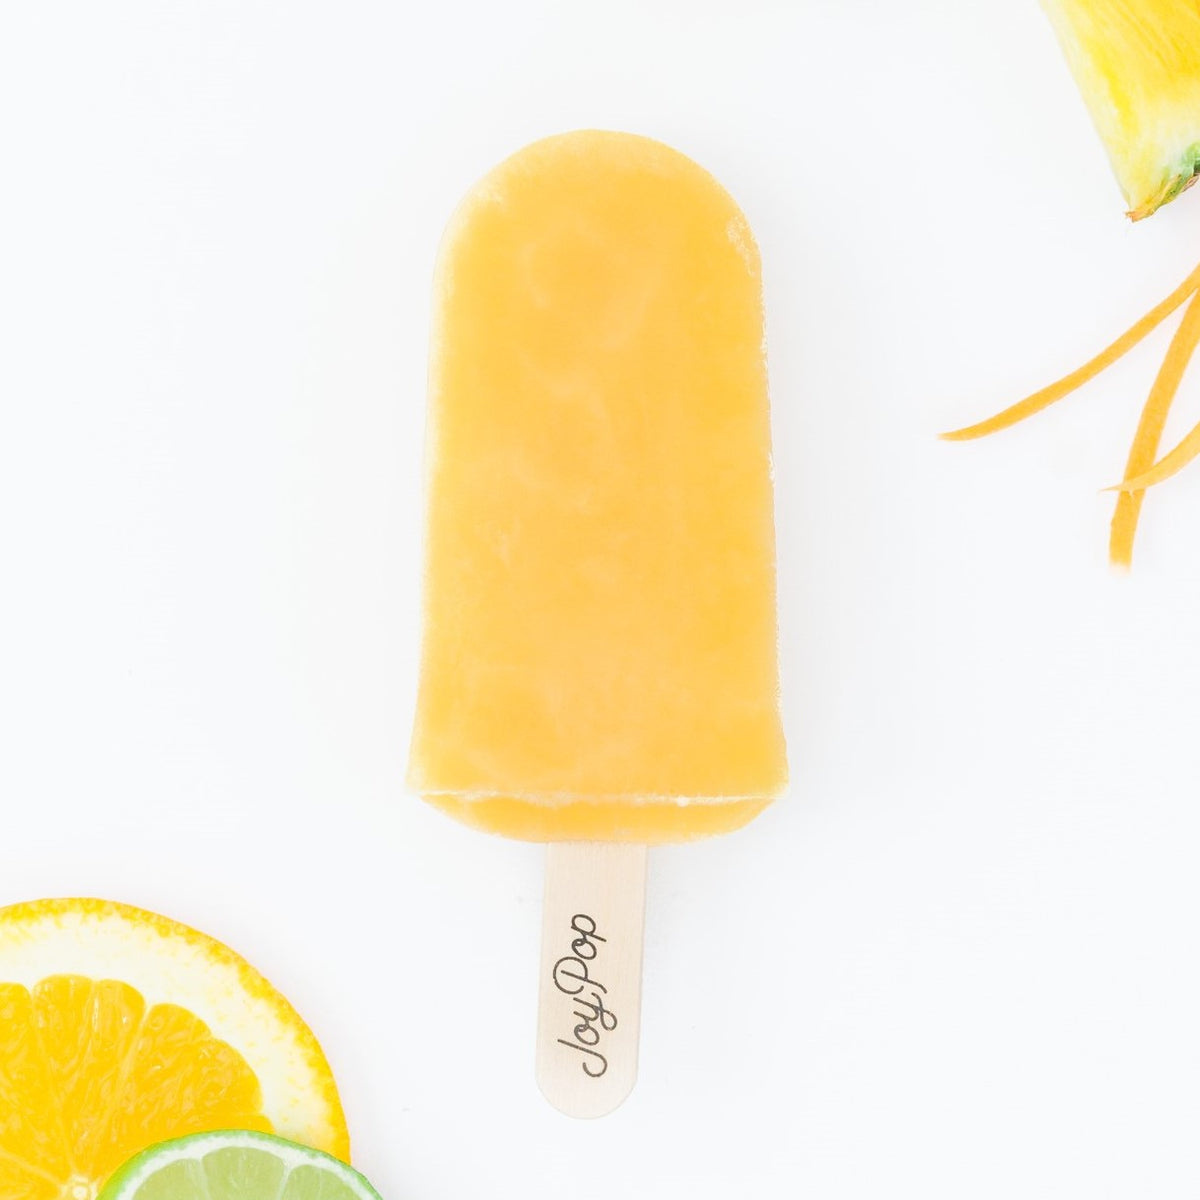 Wellness Blend frozen pop by The JoyPop Co with sliced pineapples fresh coconut a lime slice and carrot slices and a sliced orange on a white background